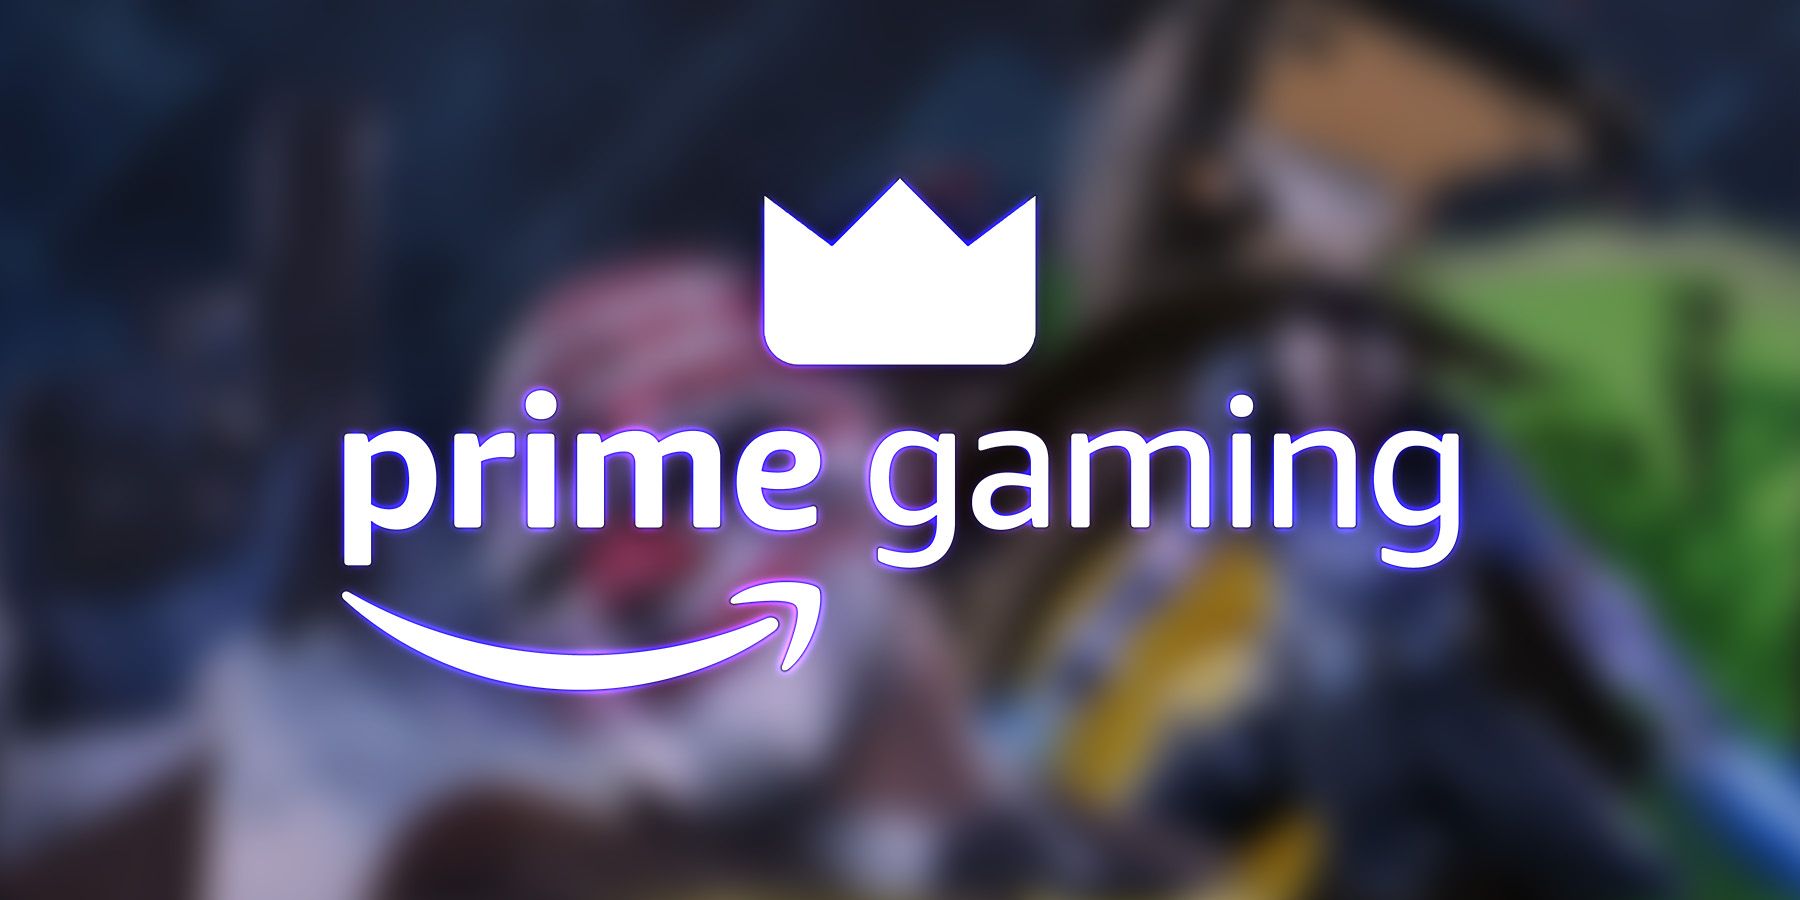 Prime Free Games for August 2023 Revealed